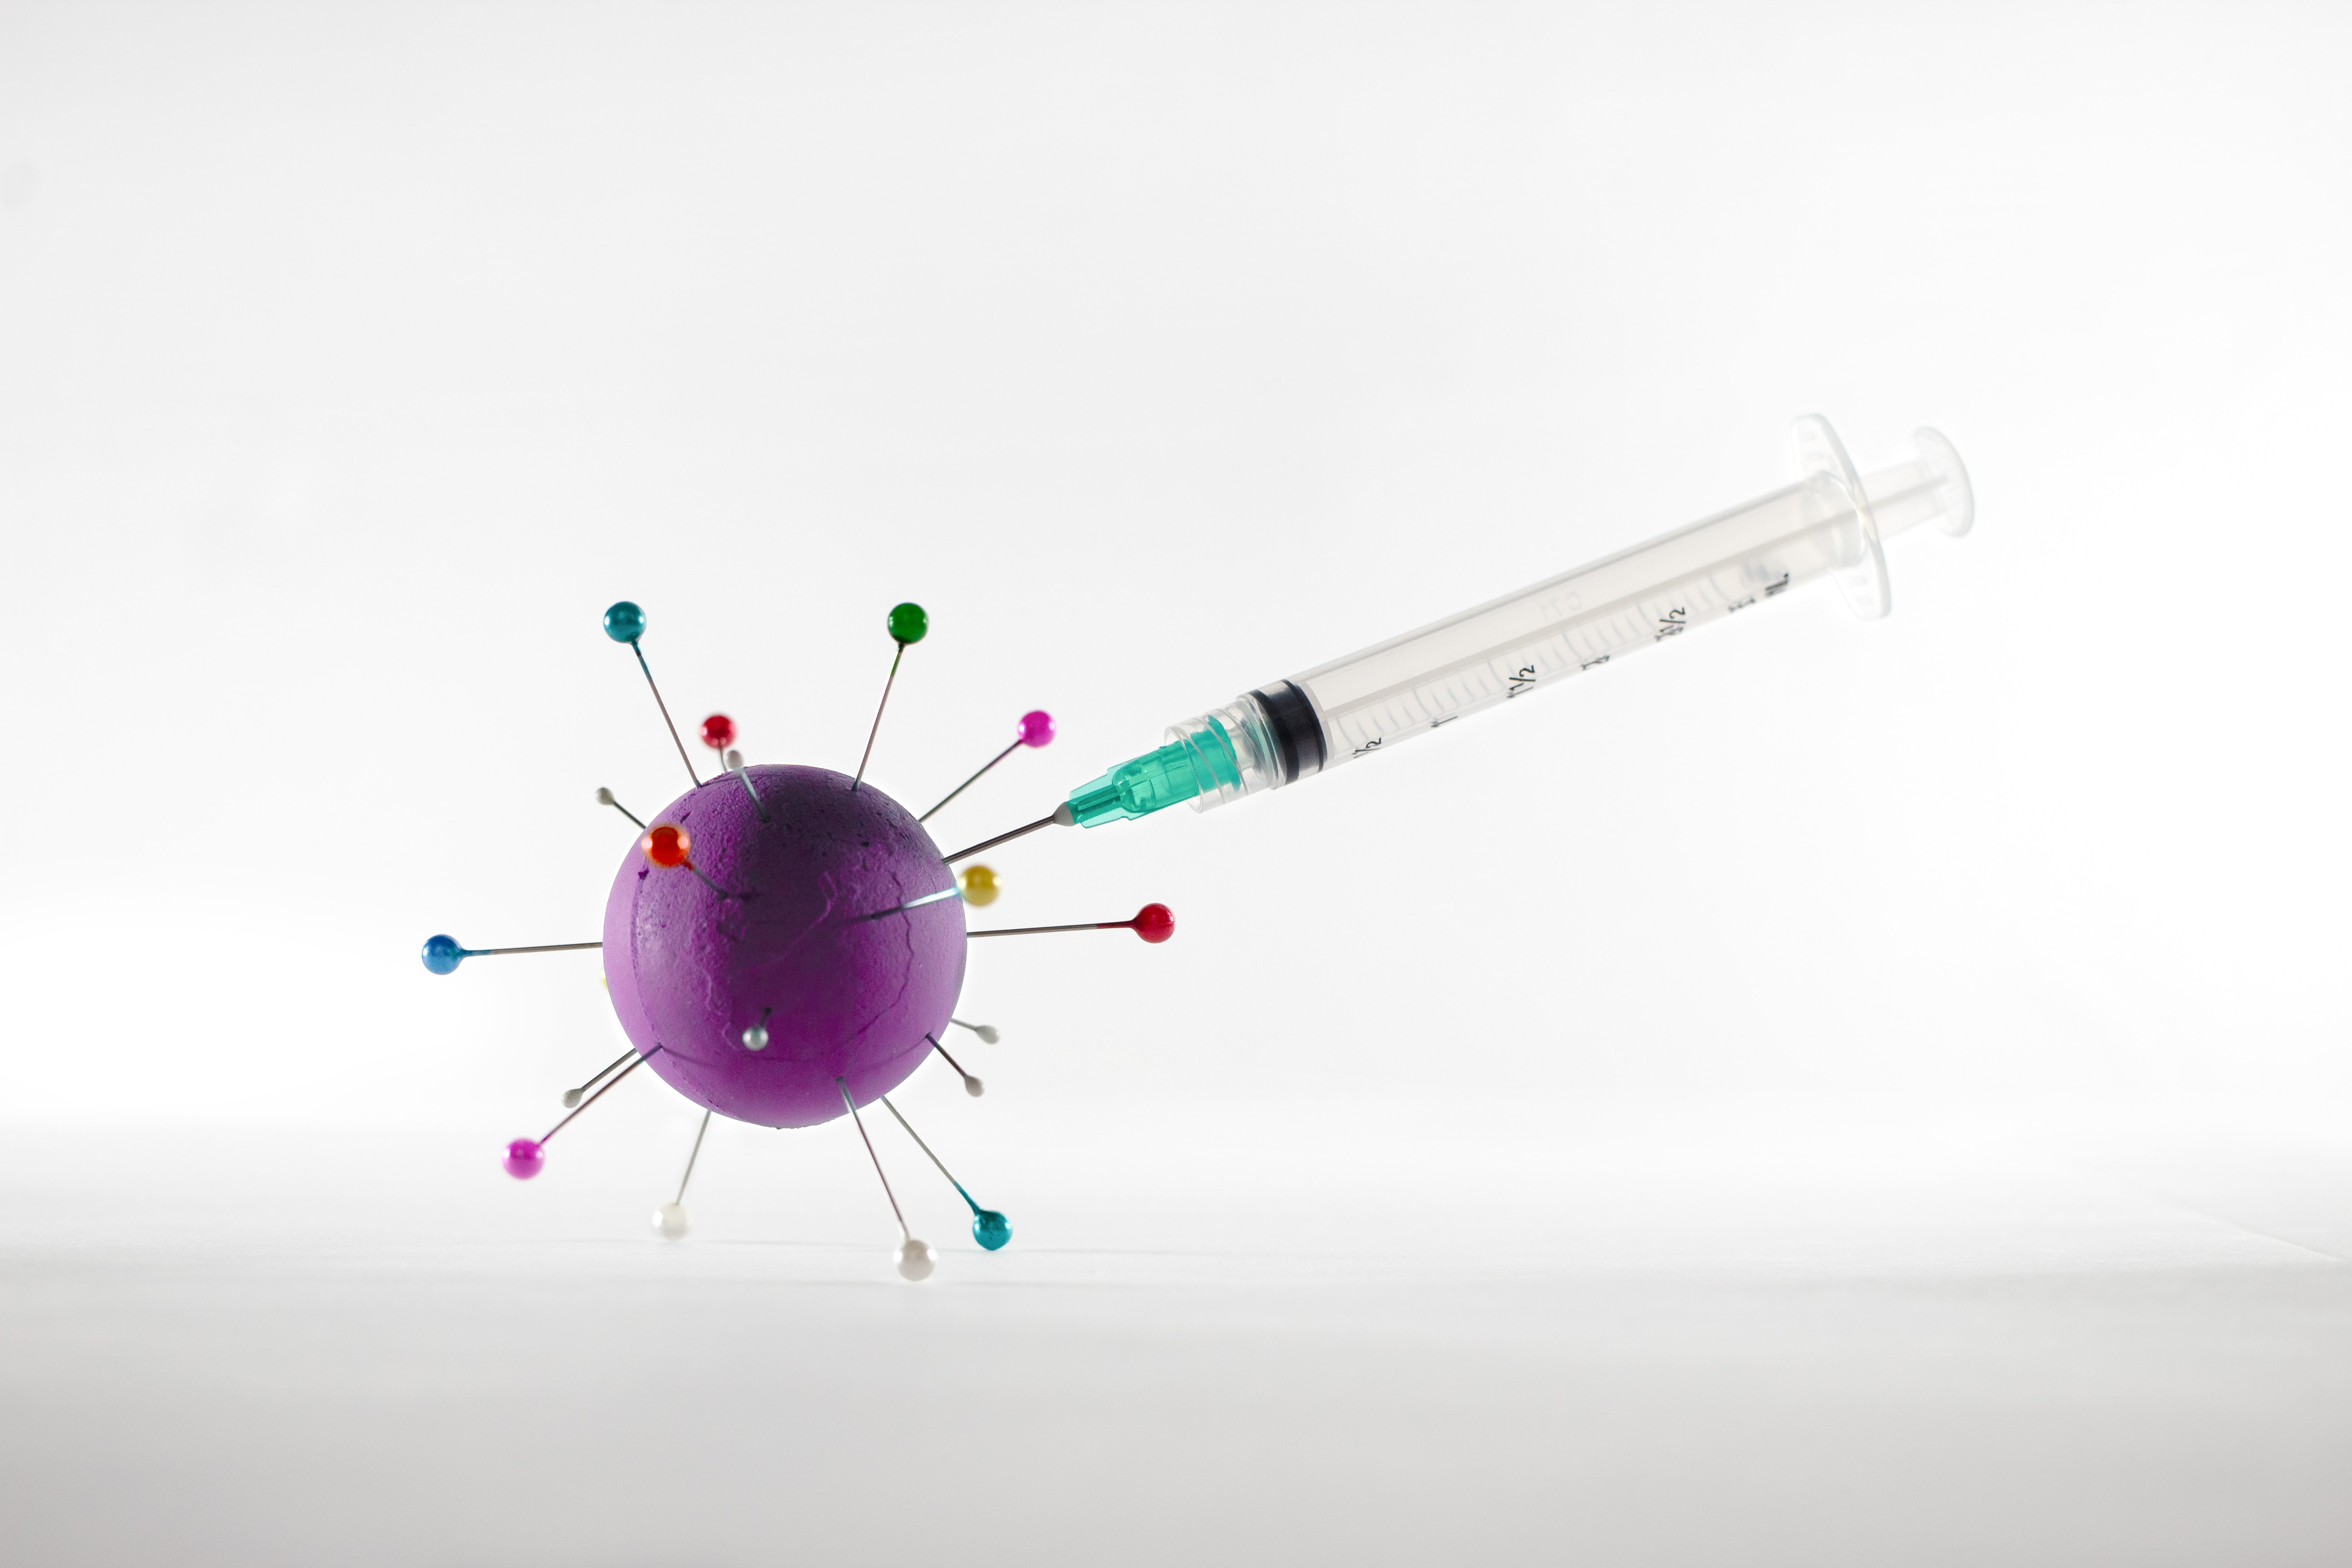 Vaccine injected into virus (photo by Ivan Diaz)